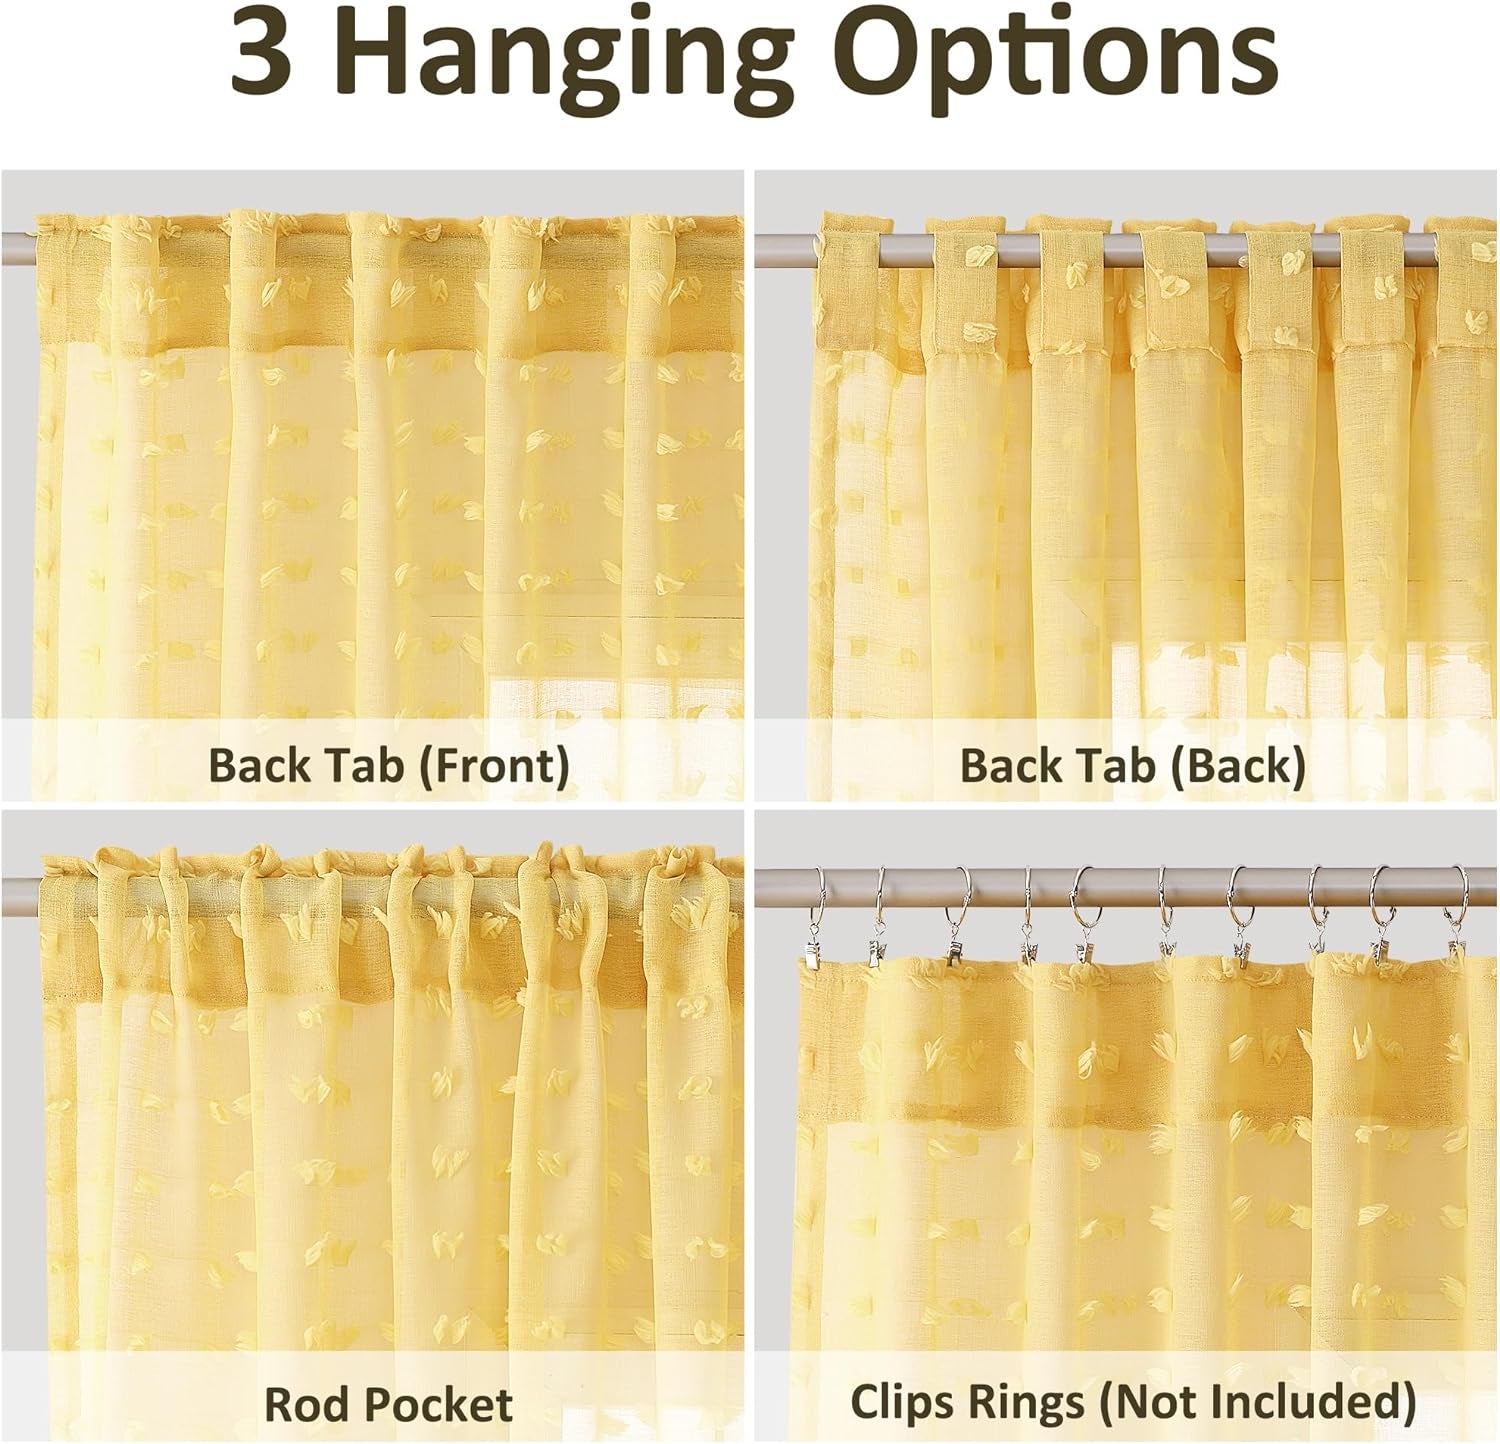 Guken Yellow Semi Sheer Curtains 90 Inches Long for Kids Bedroom Living Room Dining Room Textured Light Filtering Back Tab Rod Pocket Butterfly Cute Pom Pom Boho Drapes,52X90 Inches,2 Panels  Guken   